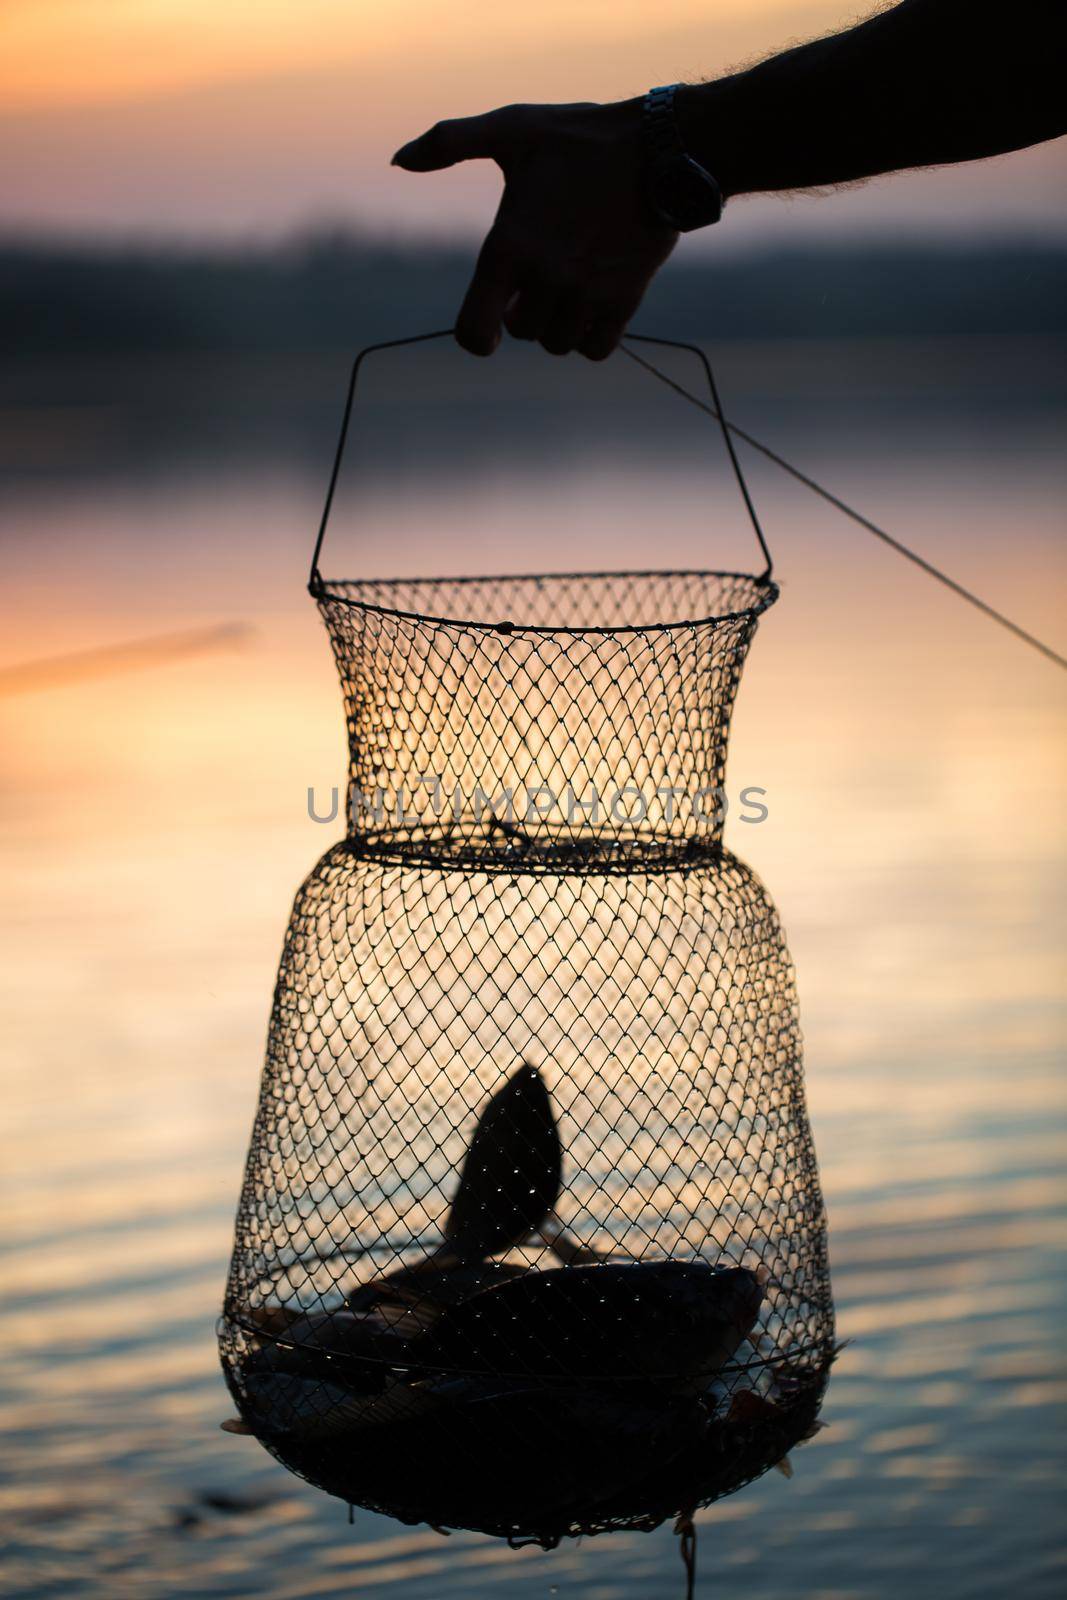 Fishing, raw freshwater fish in the net for the catch by StudioPeace